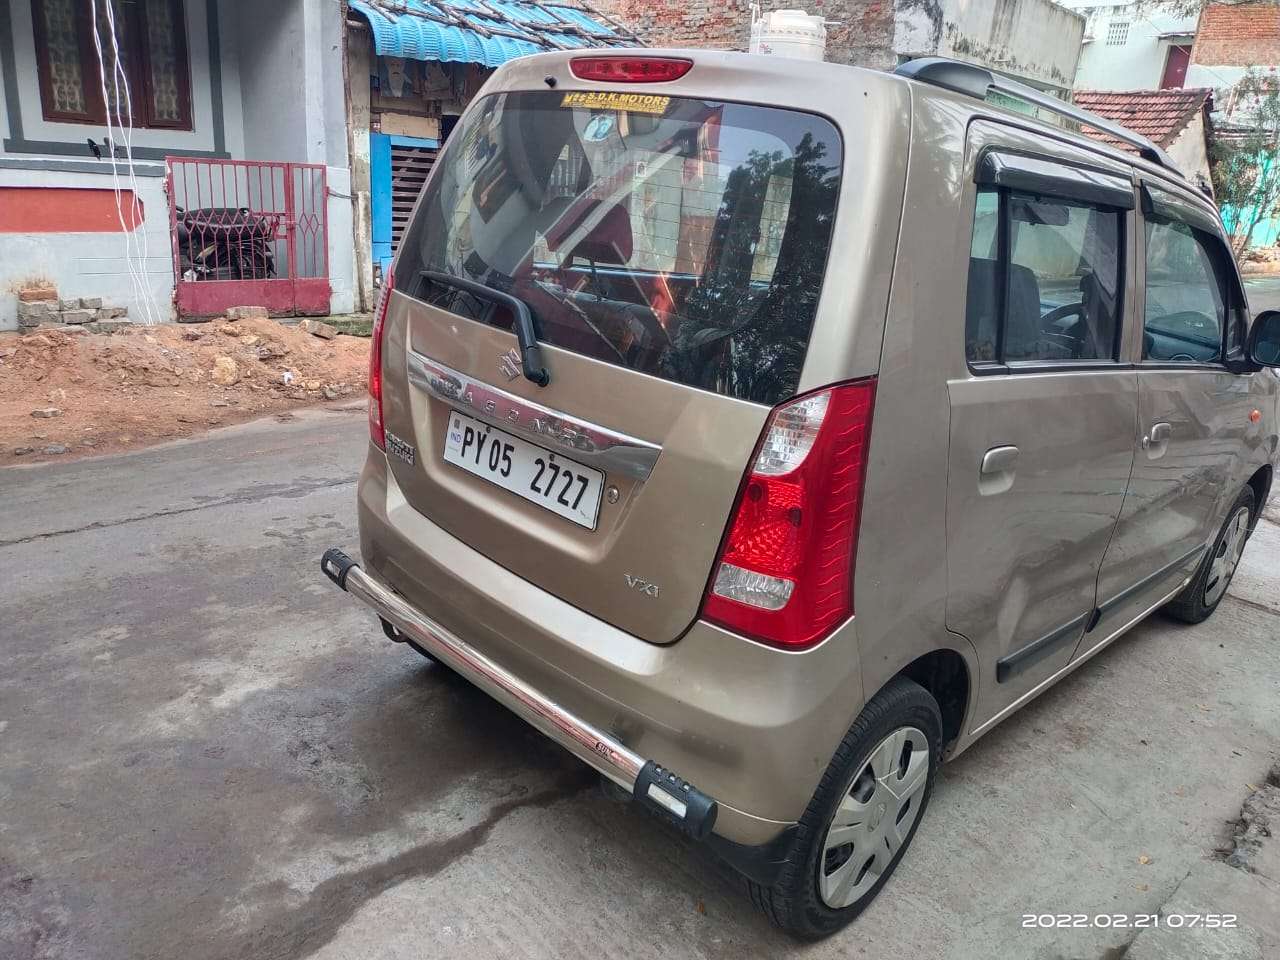 1826-for-sale-Maruthi-Suzuki-Wagon-R-1.0-Petrol-Second-Owner-2015-PY-registered-rs-365000